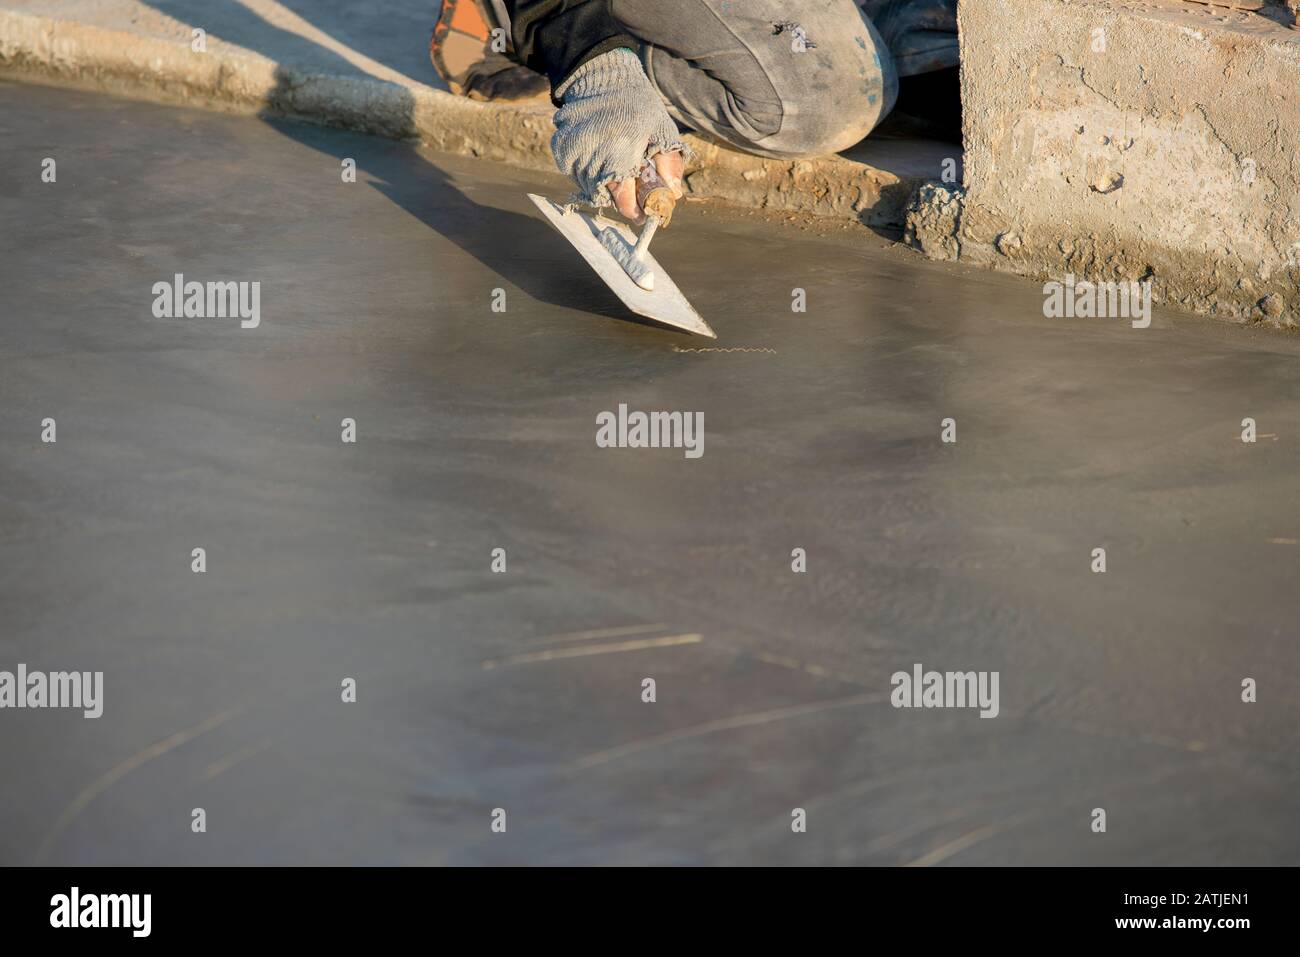 Plastering or pouring the floor with cement for construction Stock Photo